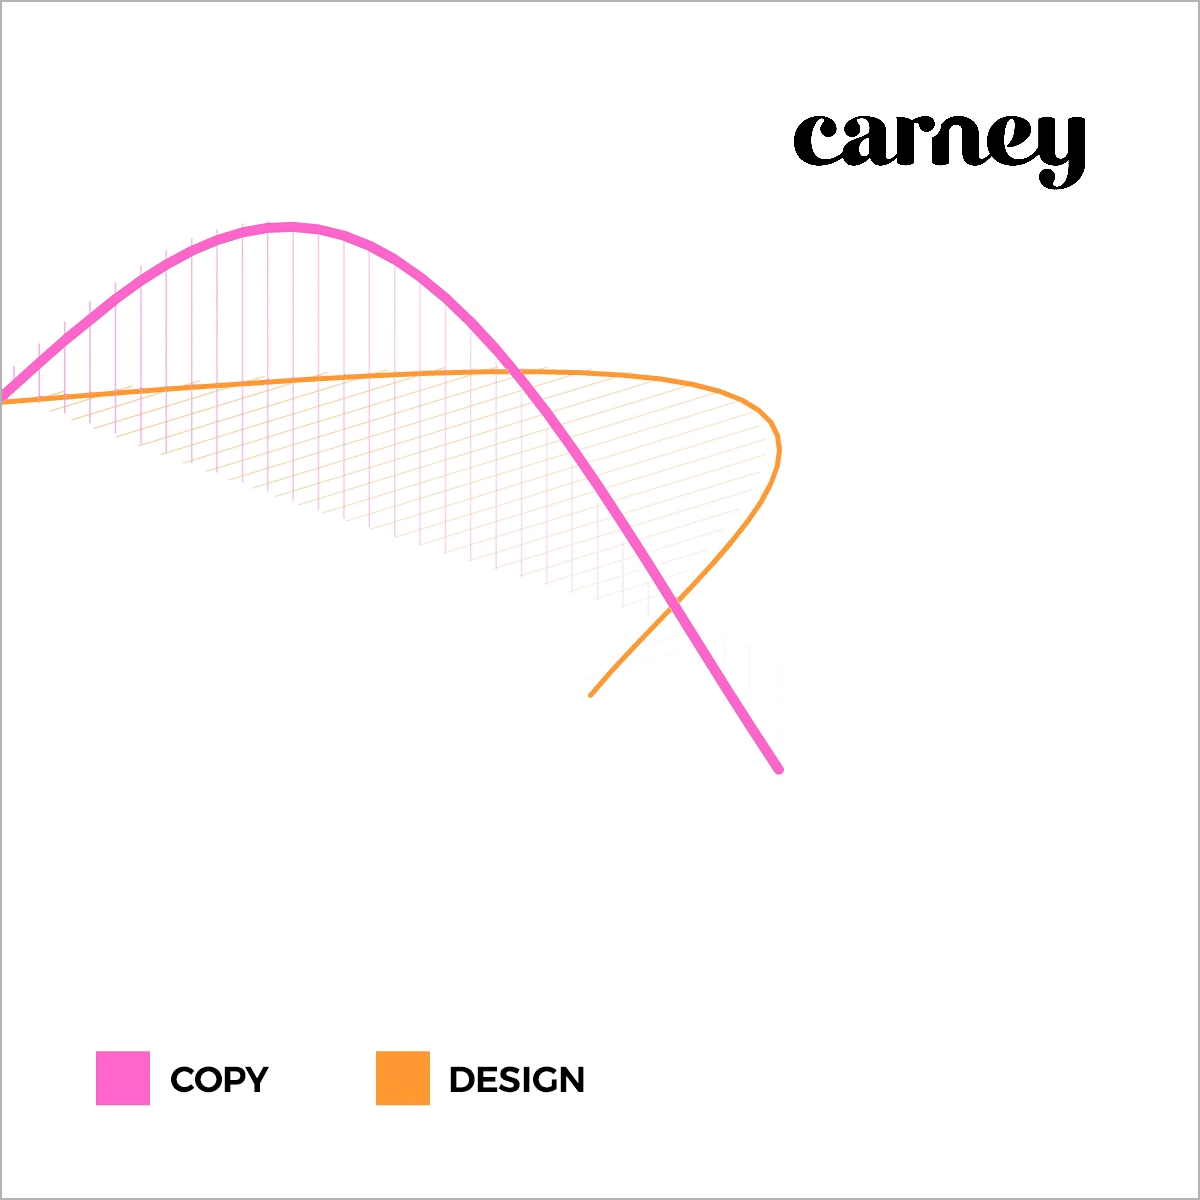 An animated electromagnetic wave illustrating the relationship between copywriting and design. By Carney.